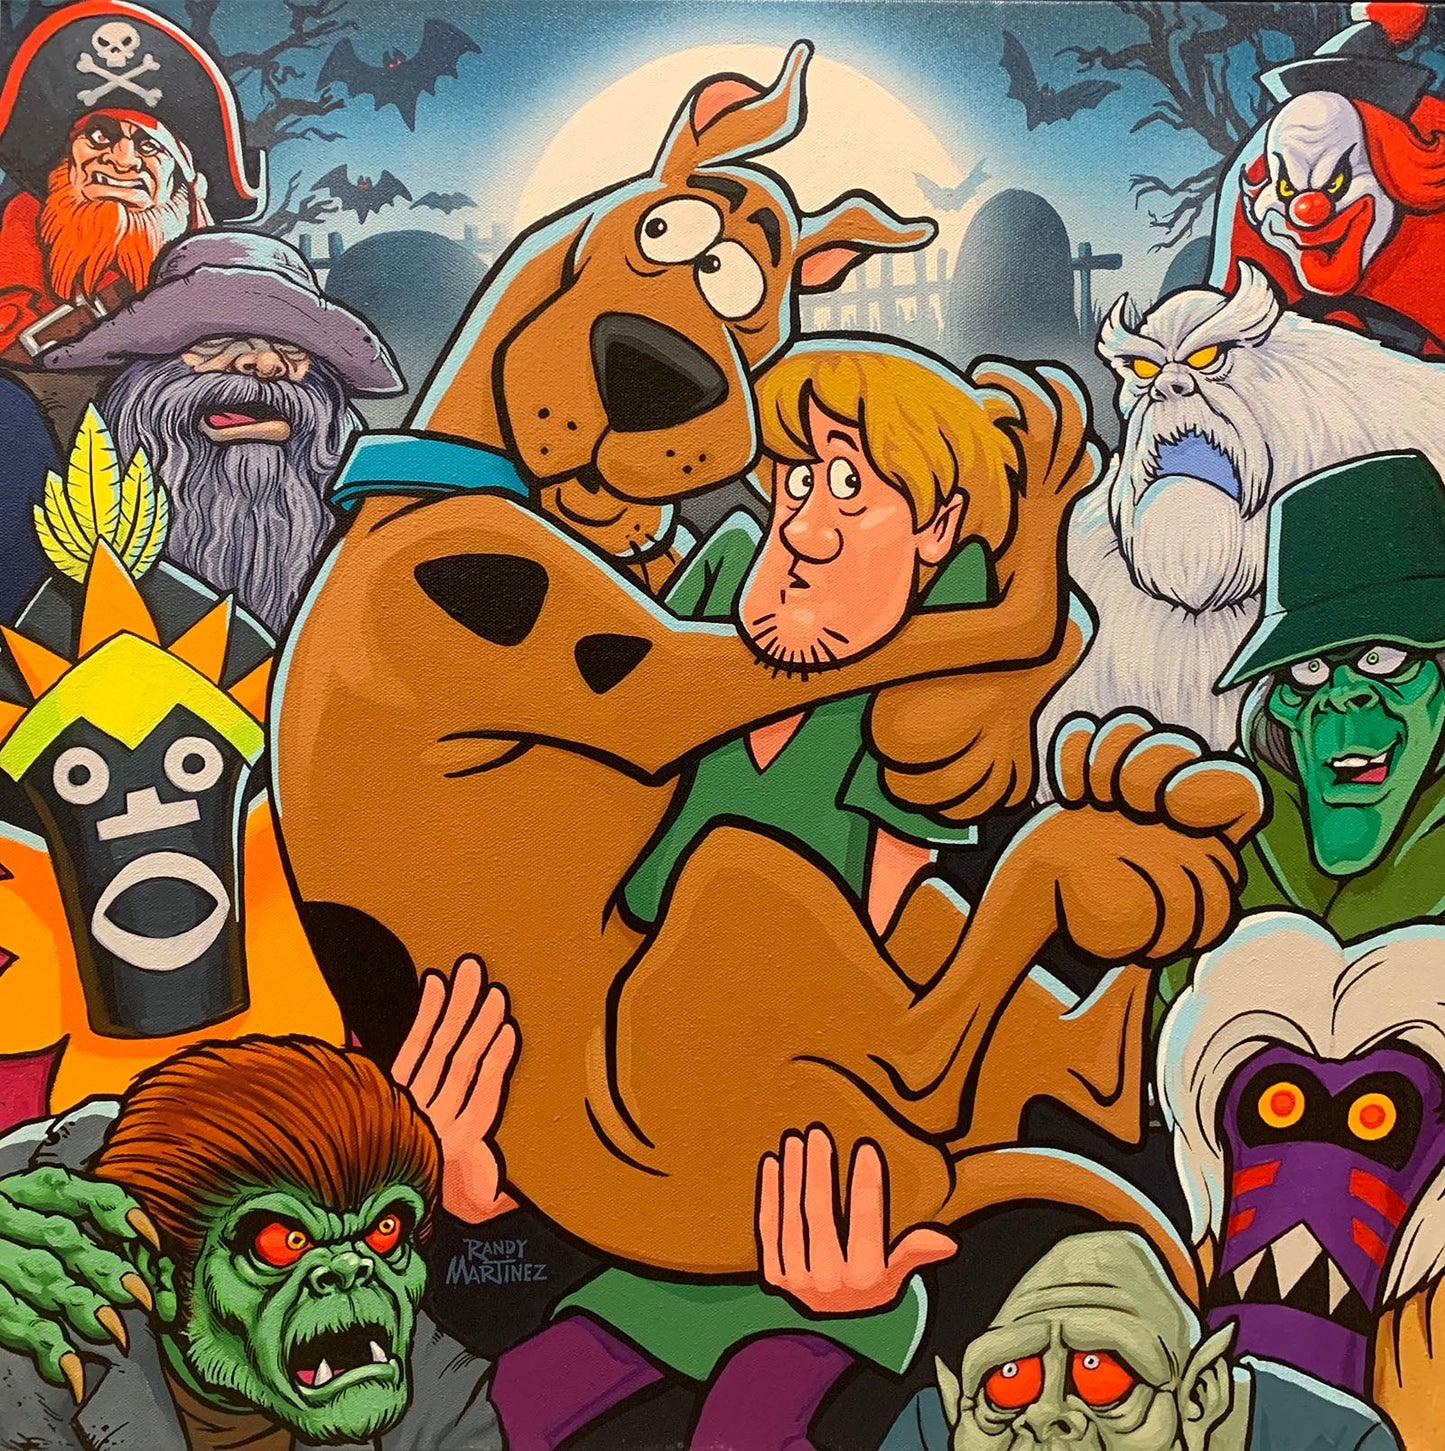 Scooby Doo Zoinks! Randy Martinez SIGNED Giclee Canvas Ltd Ed 50 WITH REMARQUE